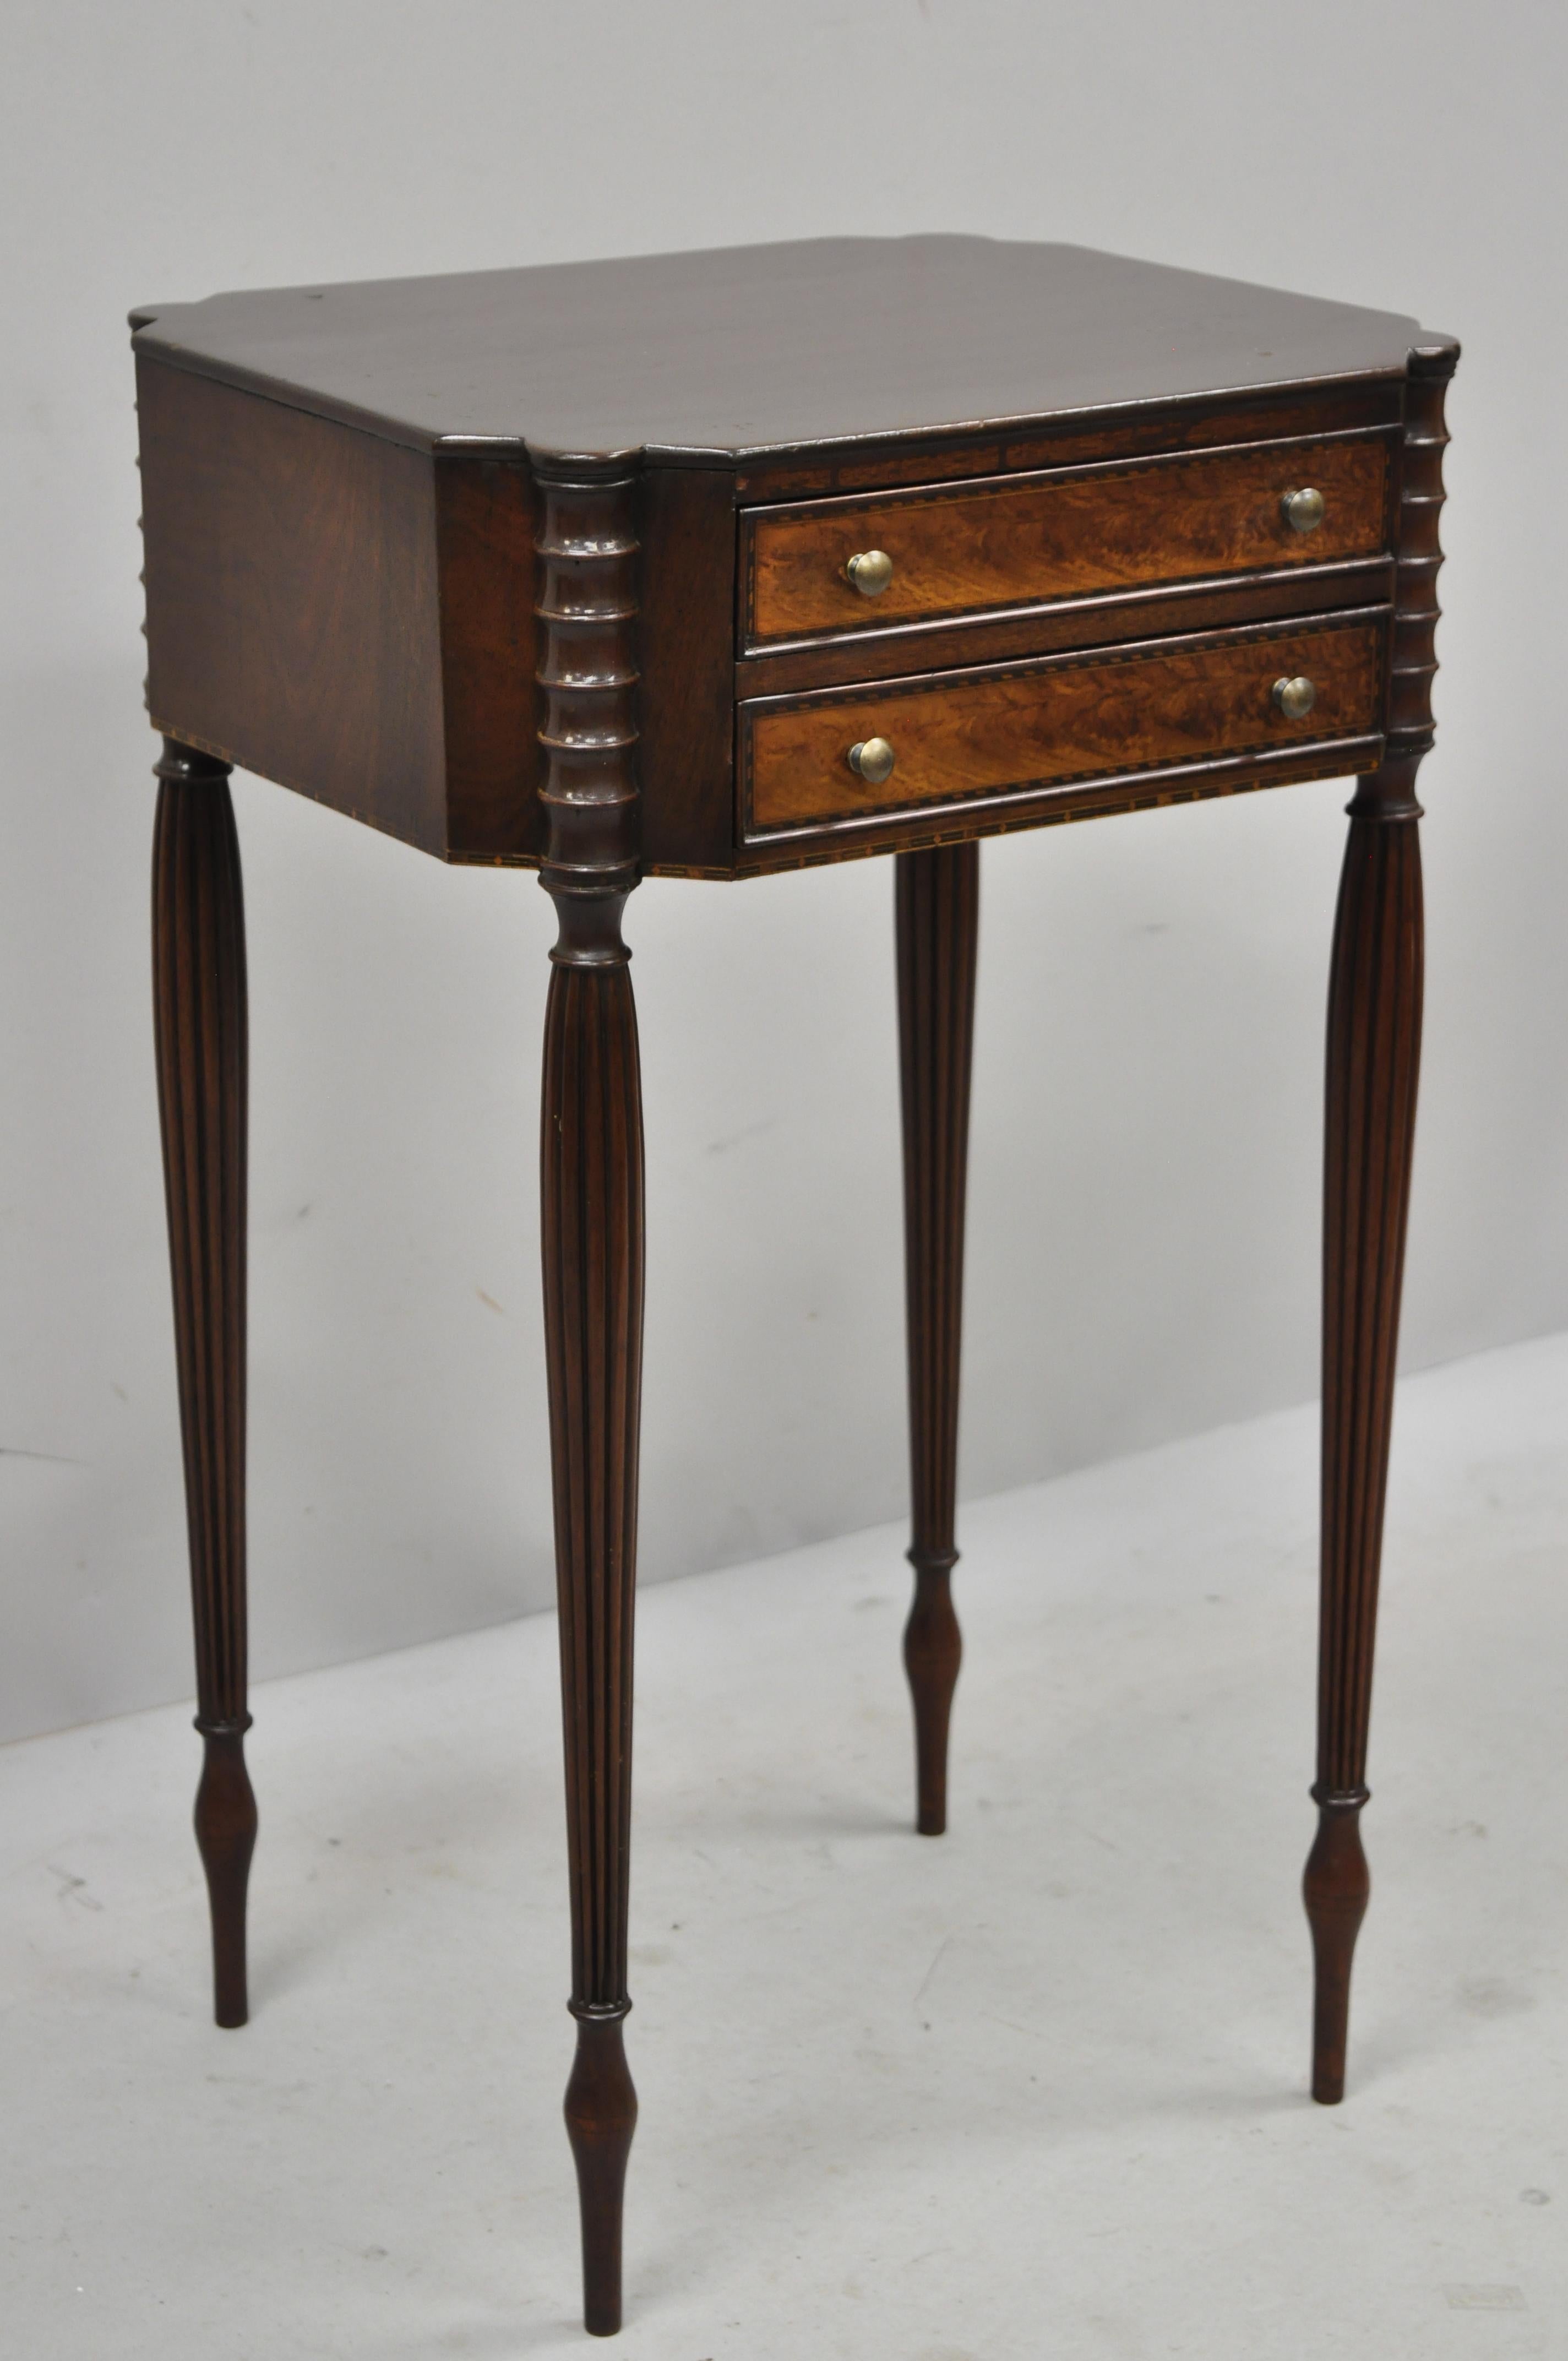 19th century antique American Sheraton tall tapered leg burl wood nightstand / side table. Item includes beautiful wood grain, nicely carved details, 2 dovetailed drawers, tall tapered legs, fine inlay, very nice antique item, circa late 19th